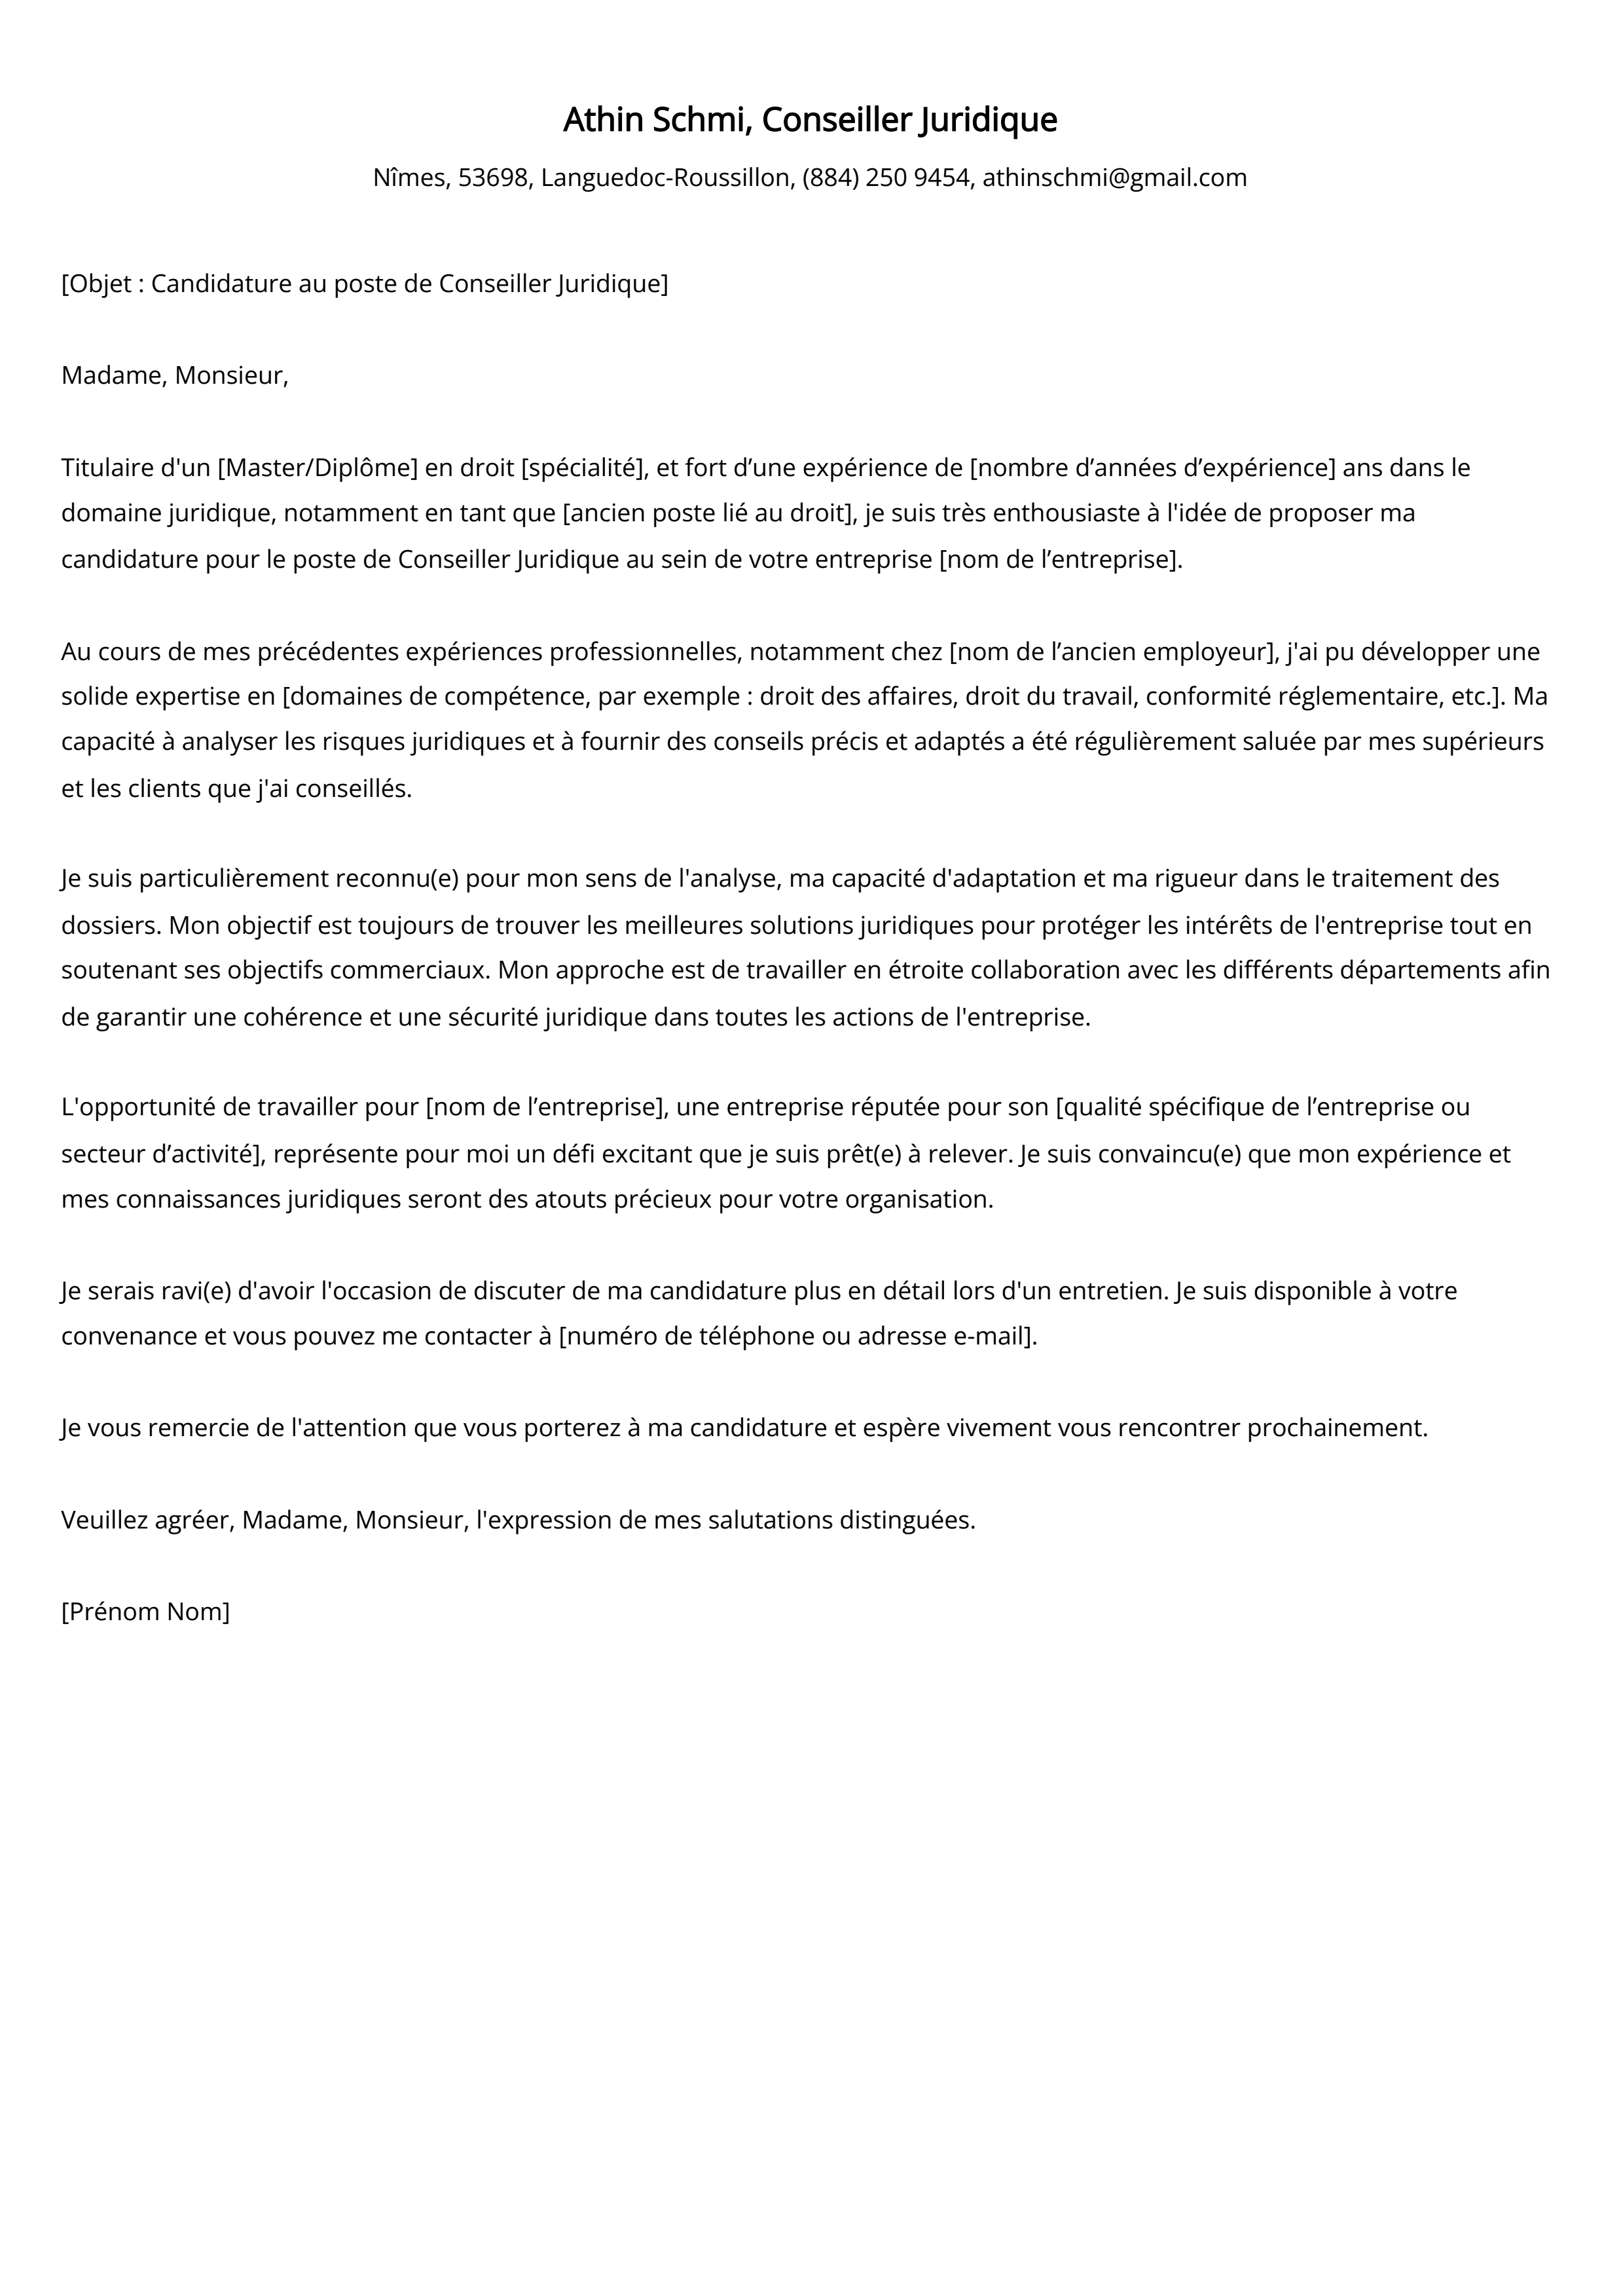 Conseiller Juridique Cover Letter Example